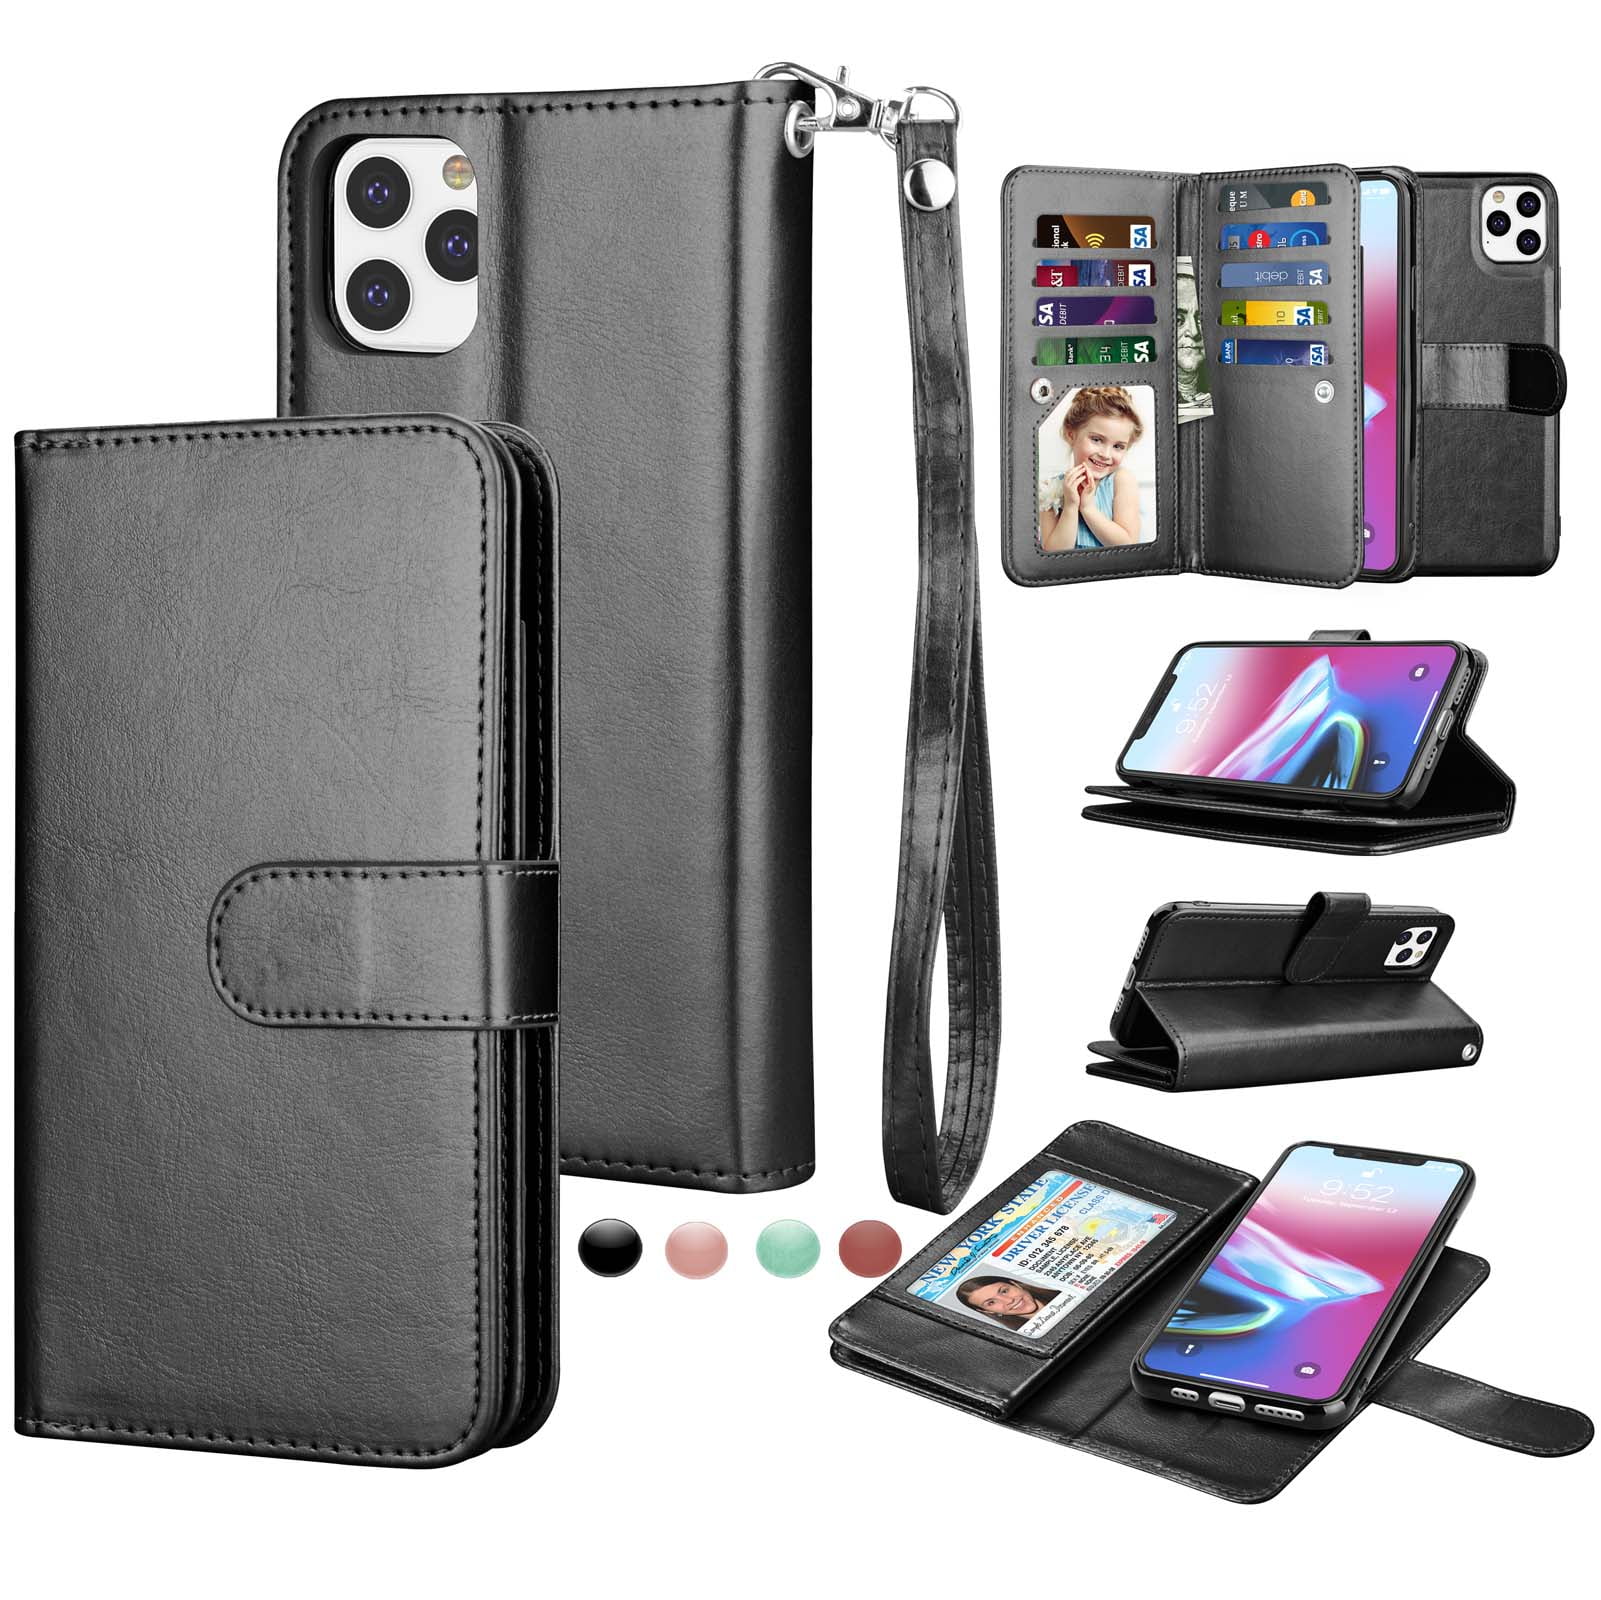 Cover for Leather Kickstand Cell Phone case Premium Business Card Holders Flip Cover iPhone 11 Pro Flip Case 